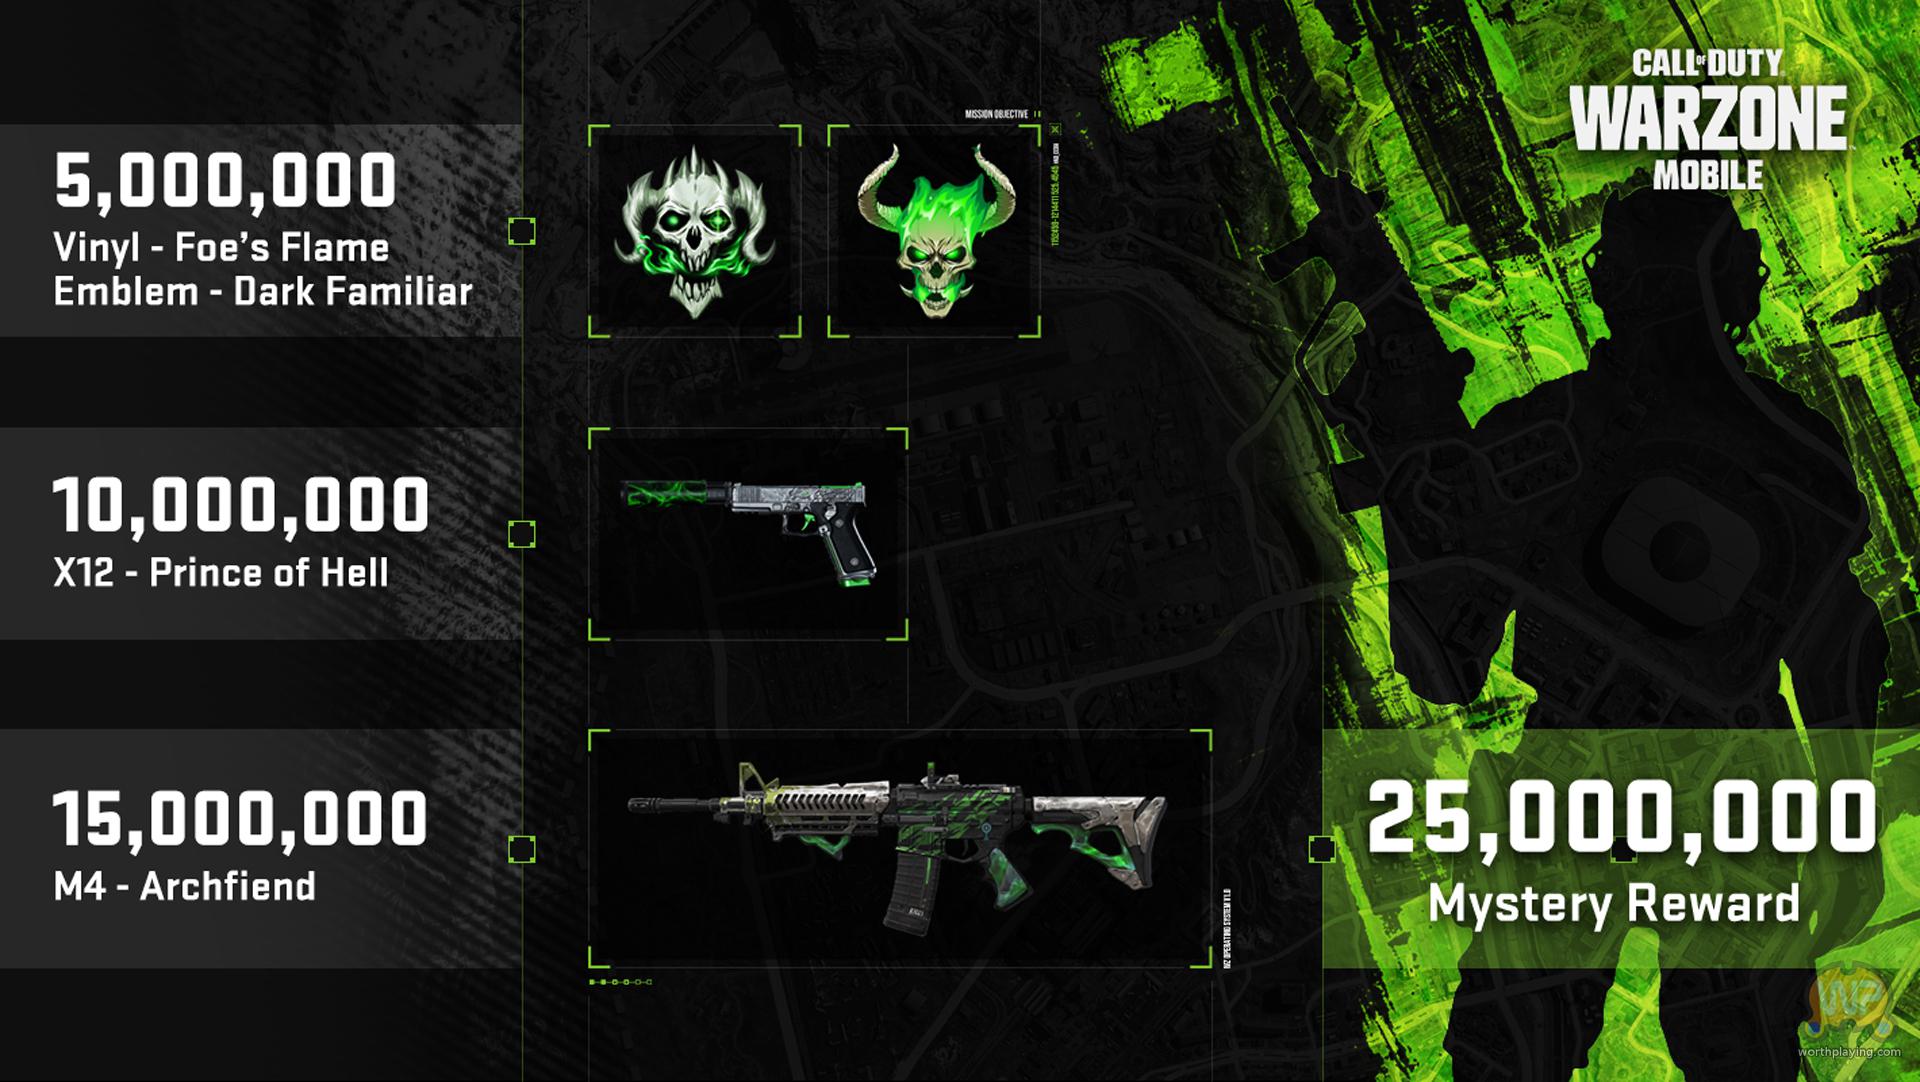 Релиз call of duty warzone mobile. Варзон Call of Duty. Cod Warzone mobile. Cod Королевская битва. Call of Duty®: Warzone™ mobile.